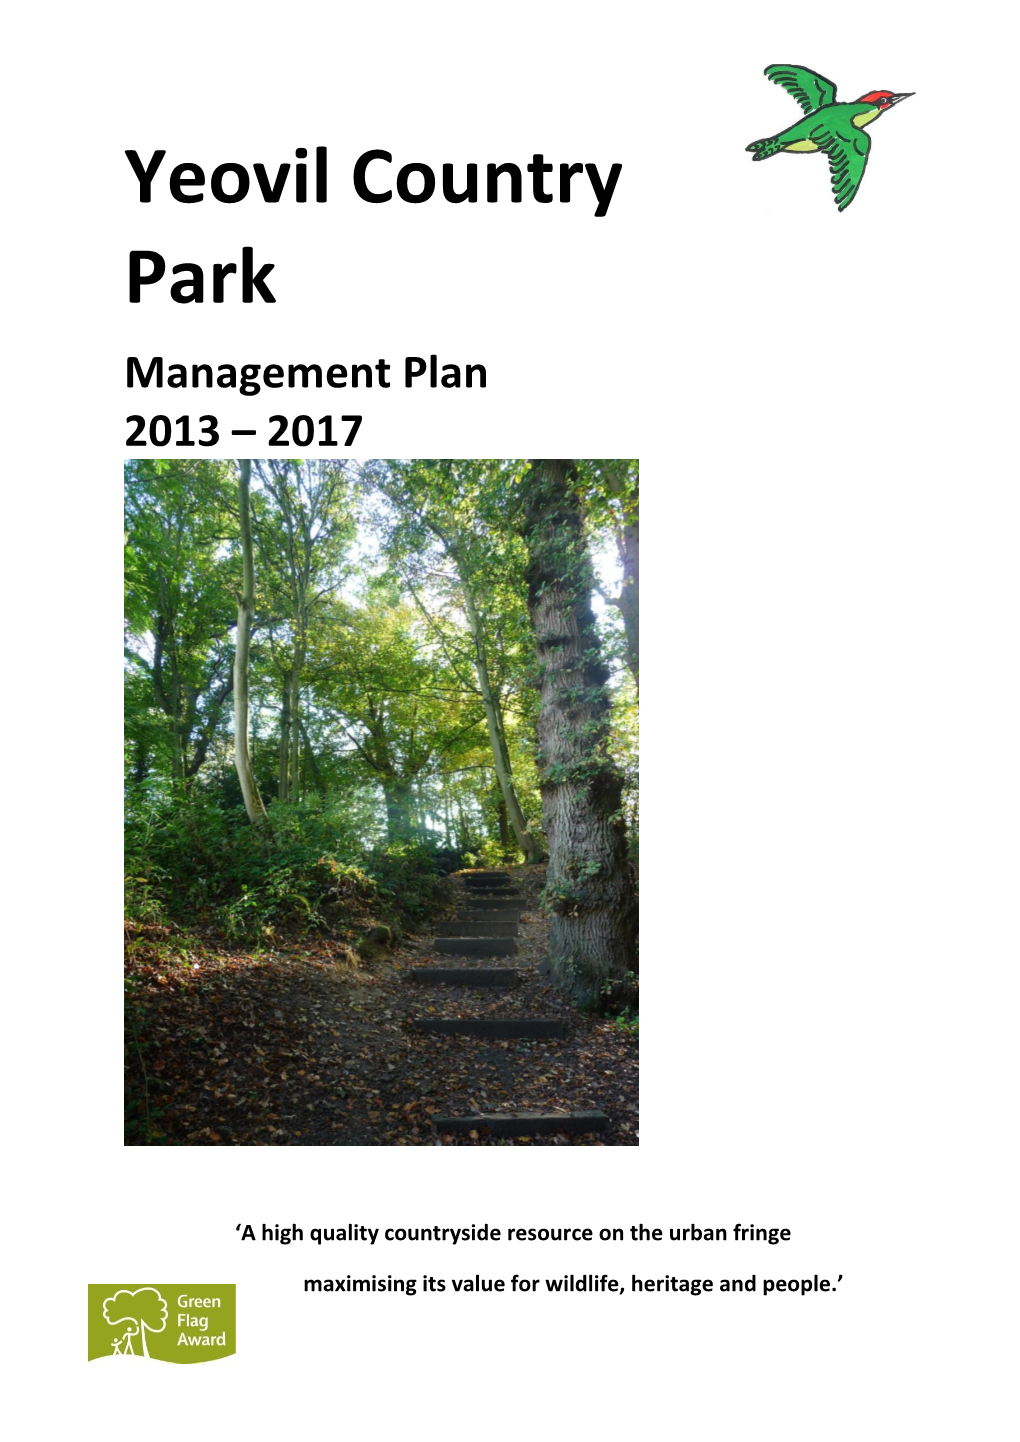 Yeovil Country Park Management Plan 2013 – 2017